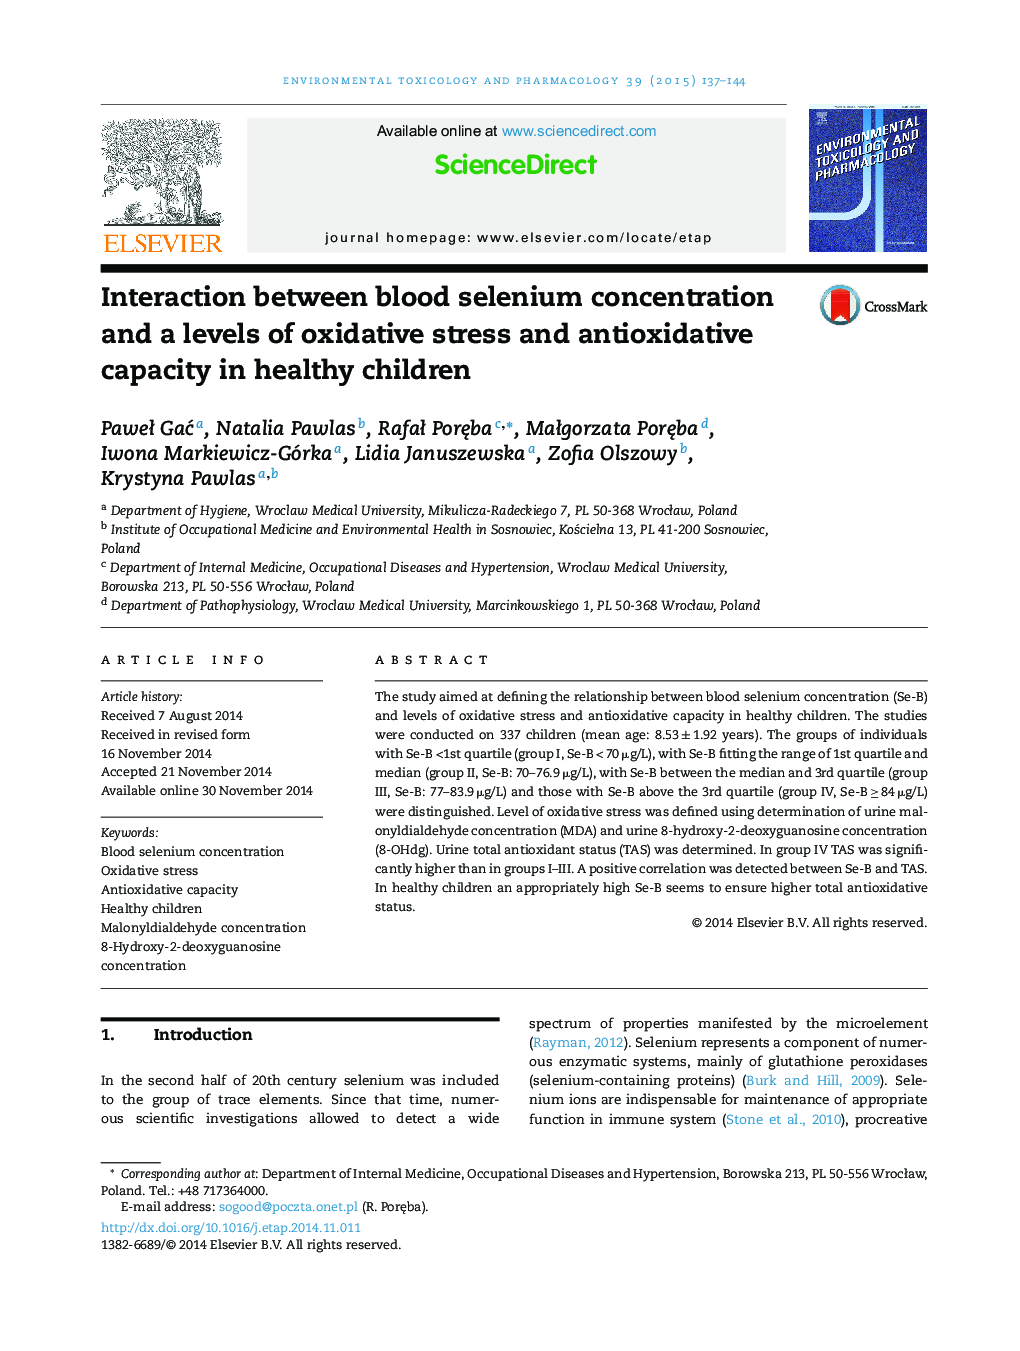 Interaction between blood selenium concentration and a levels of oxidative stress and antioxidative capacity in healthy children